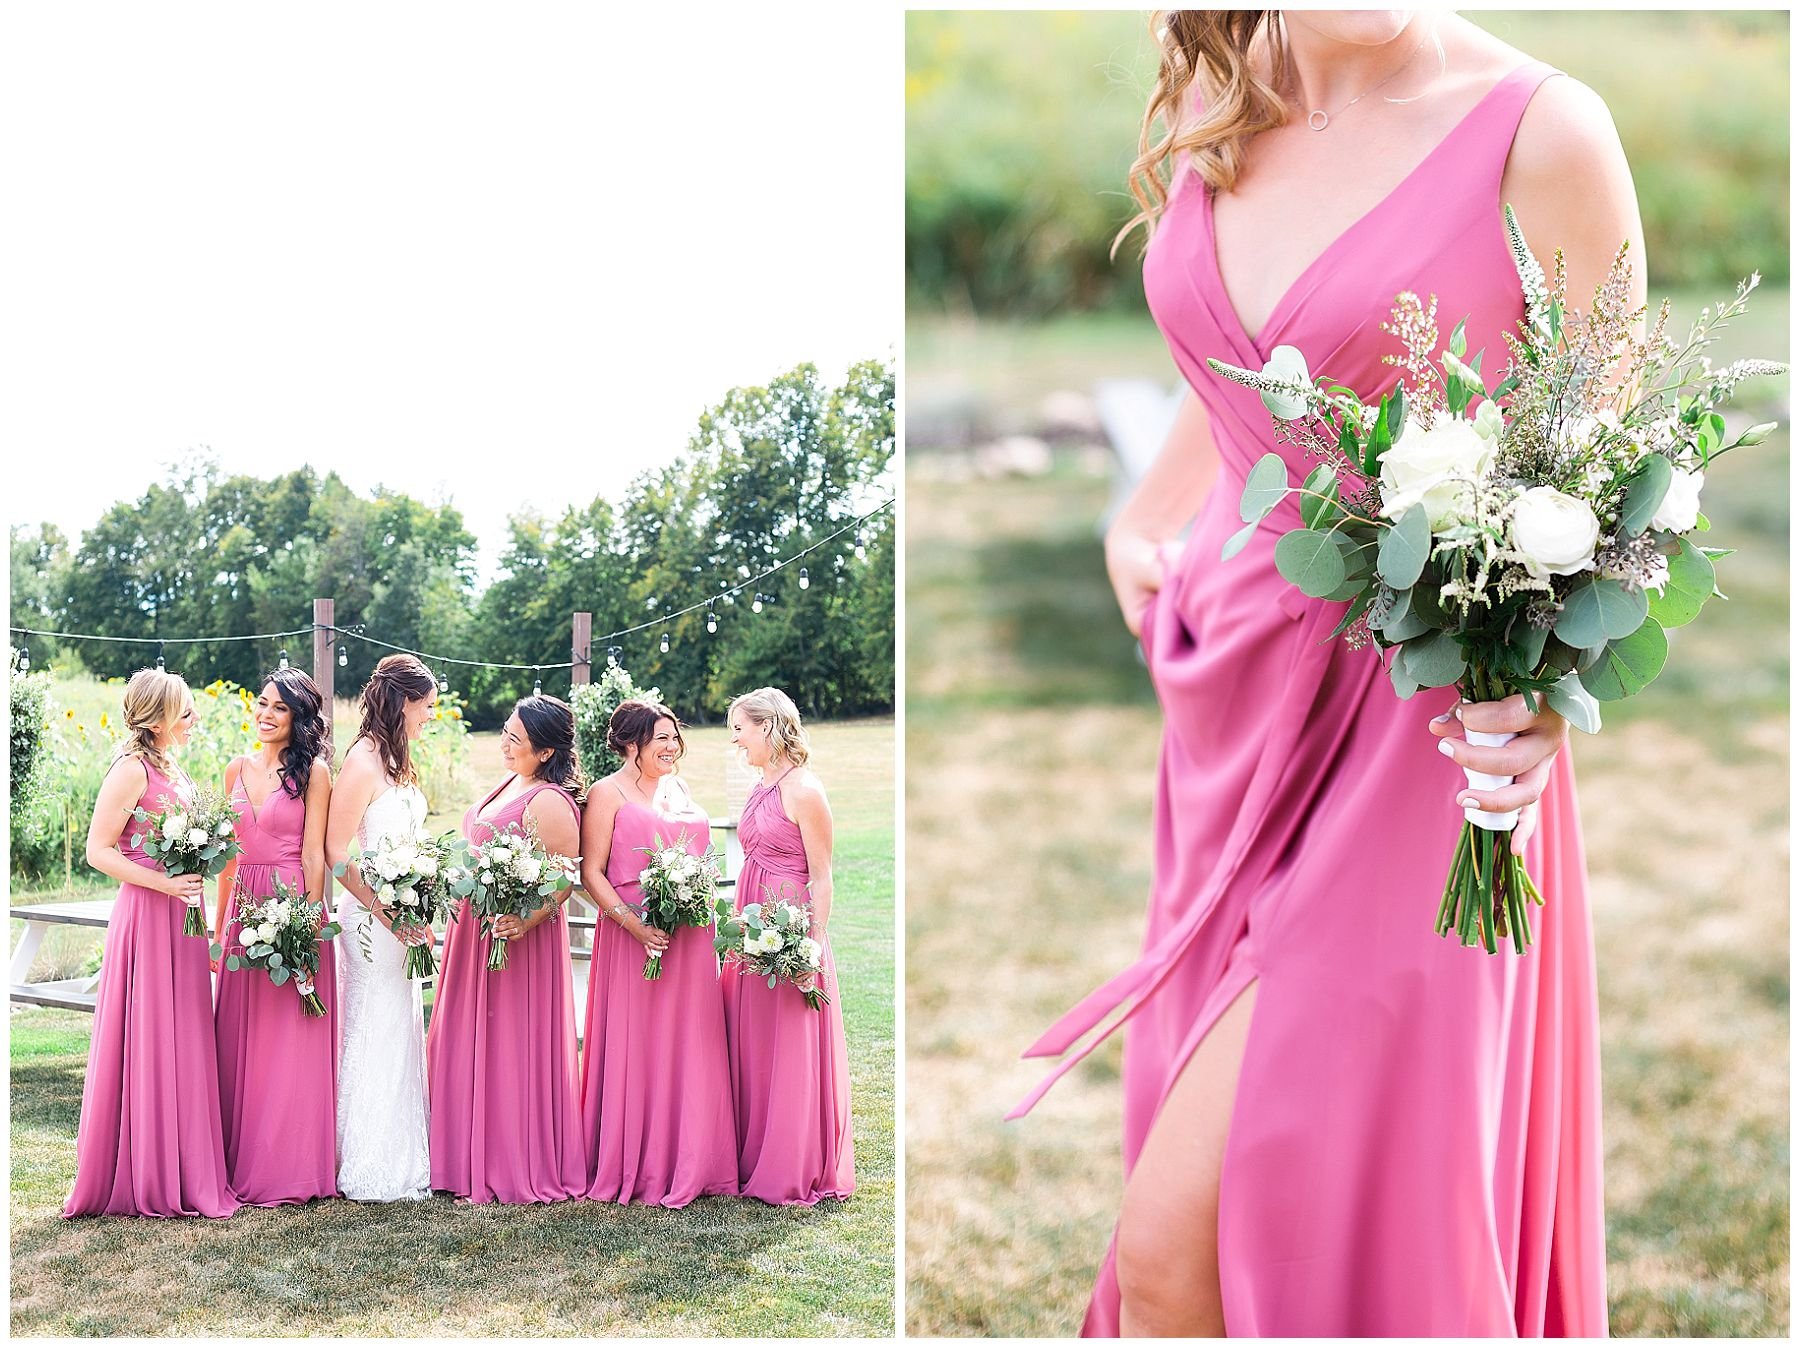 Dusty rose bridesmaids with wildflower bouquets